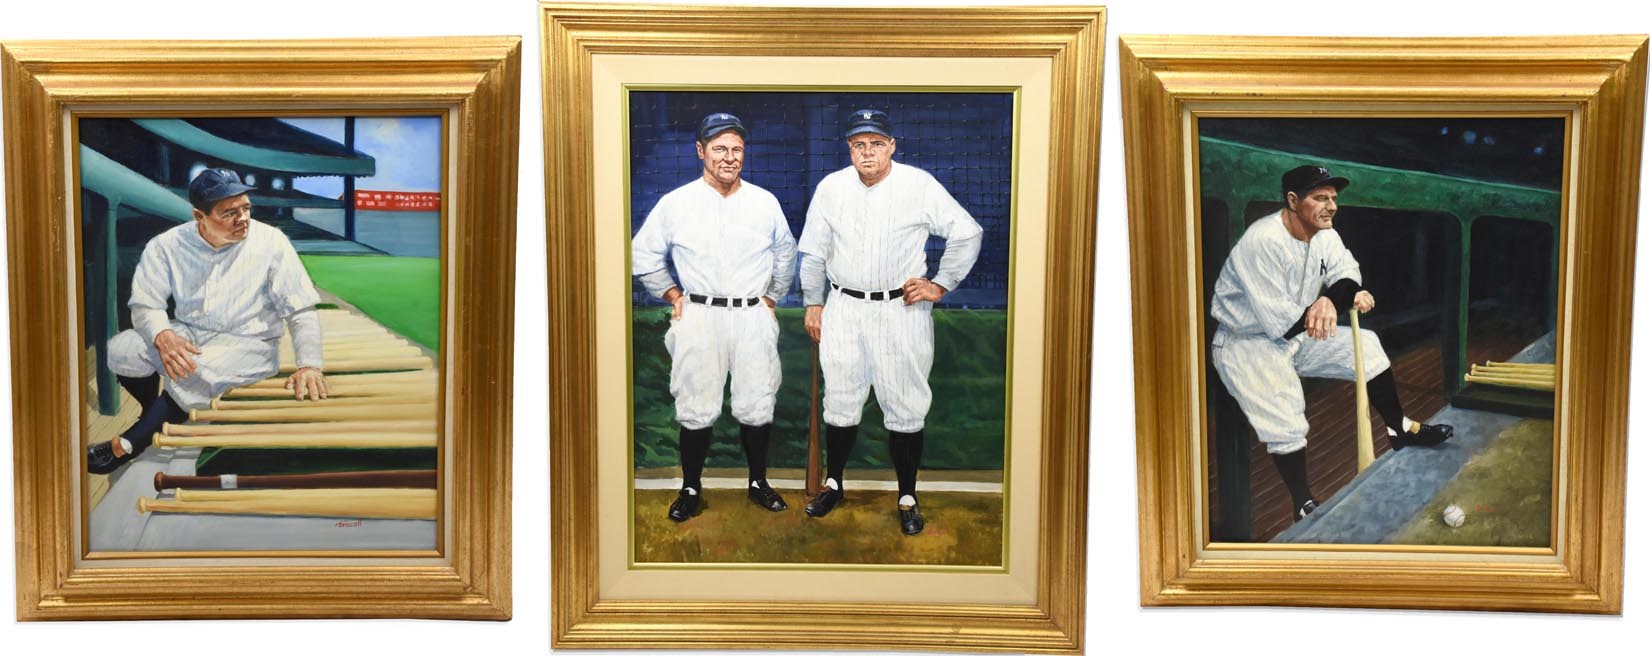 Ruth and Gehrig - Babe Ruth & Lou Gehrig Oils on Canvas by Driscoll (3)